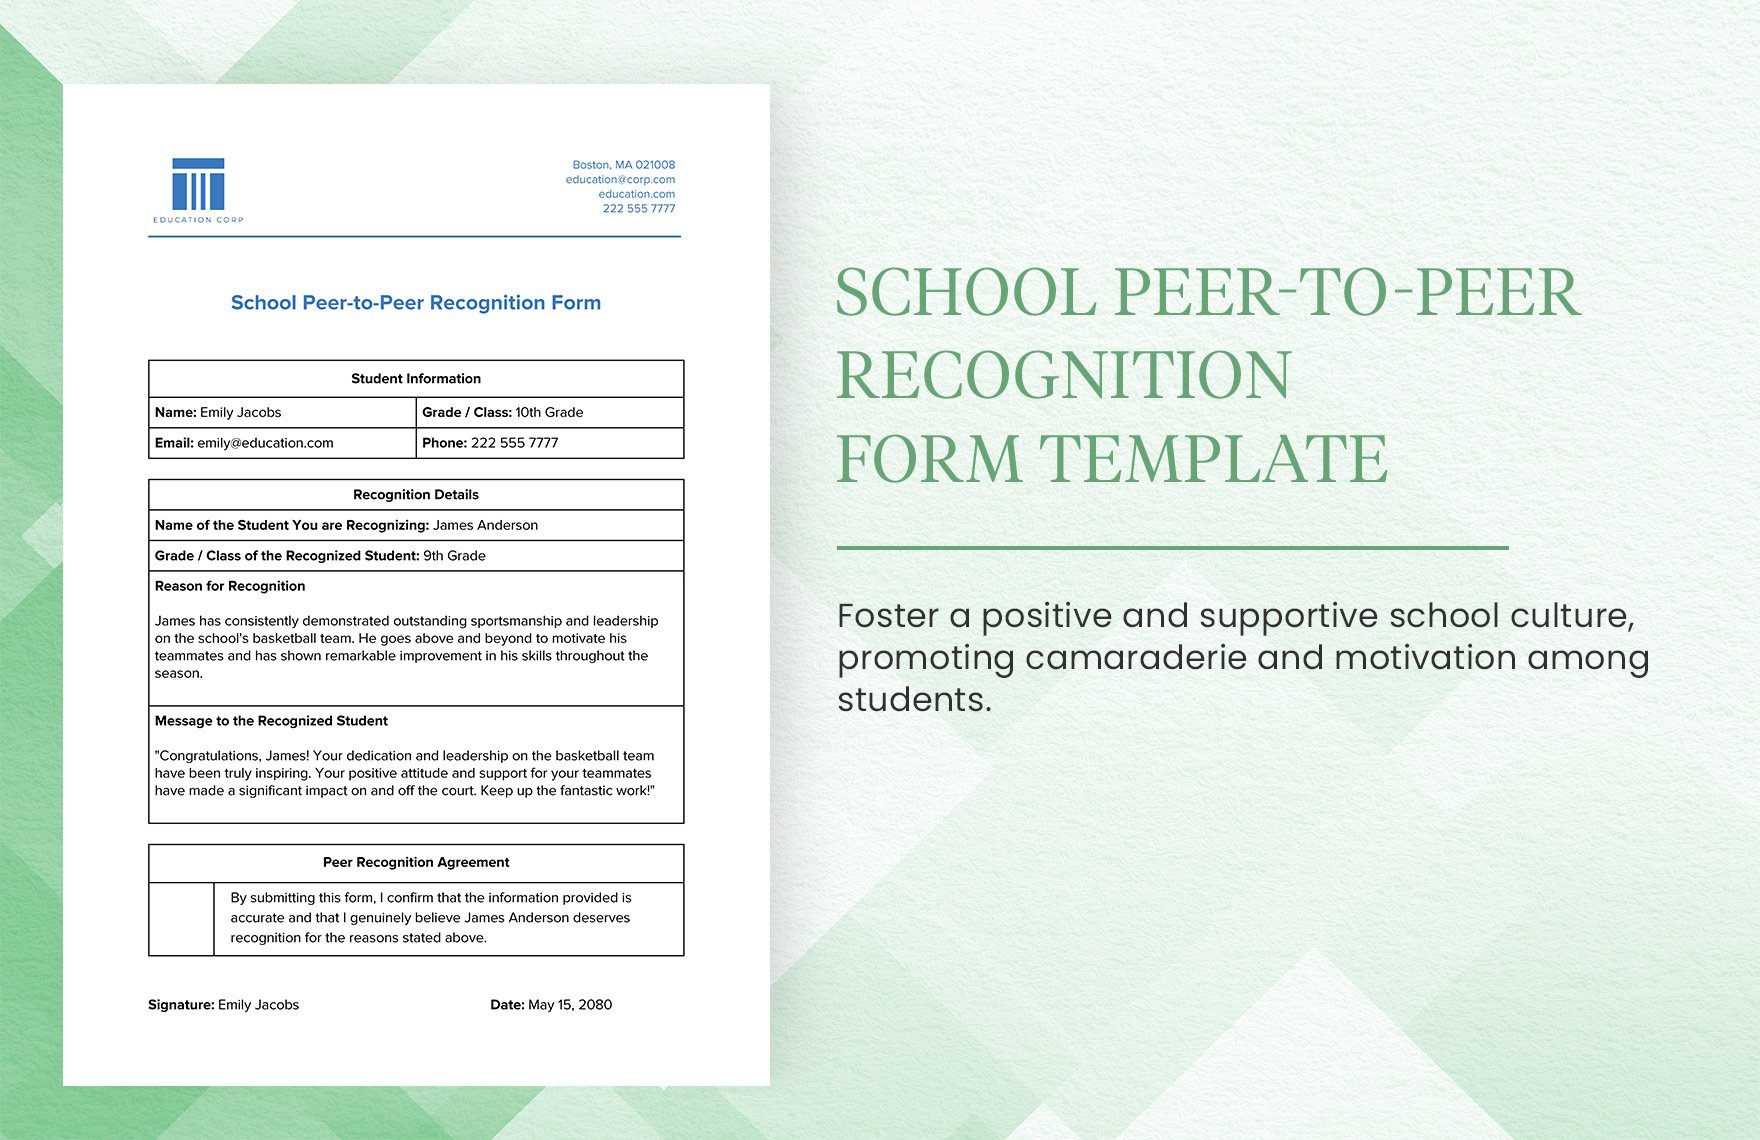 School Peer-to-Peer Recognition Form Template